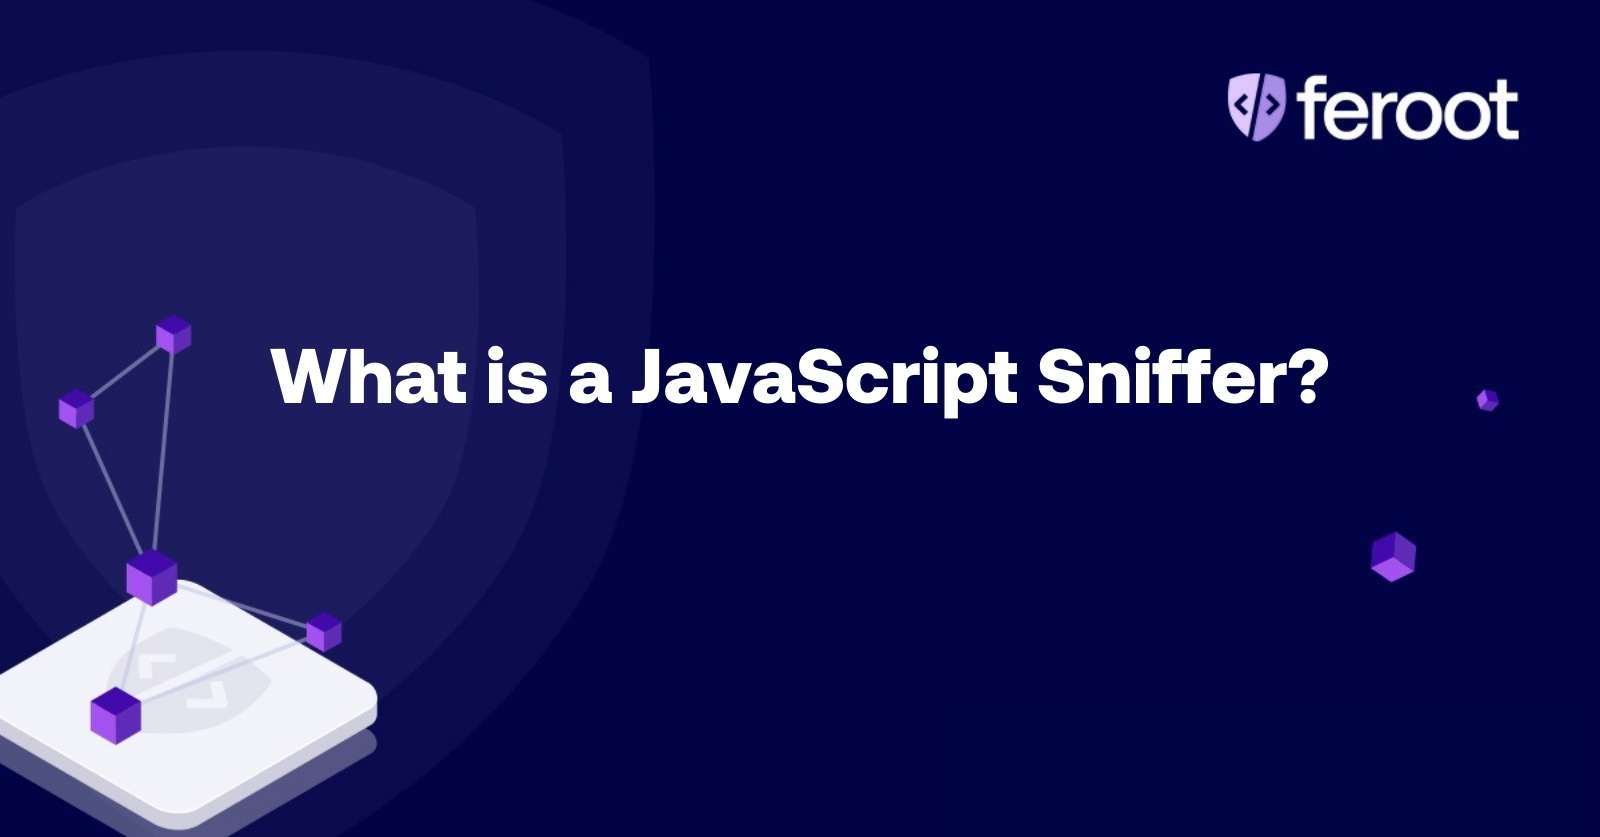 What is a JavaScript Sniffer?